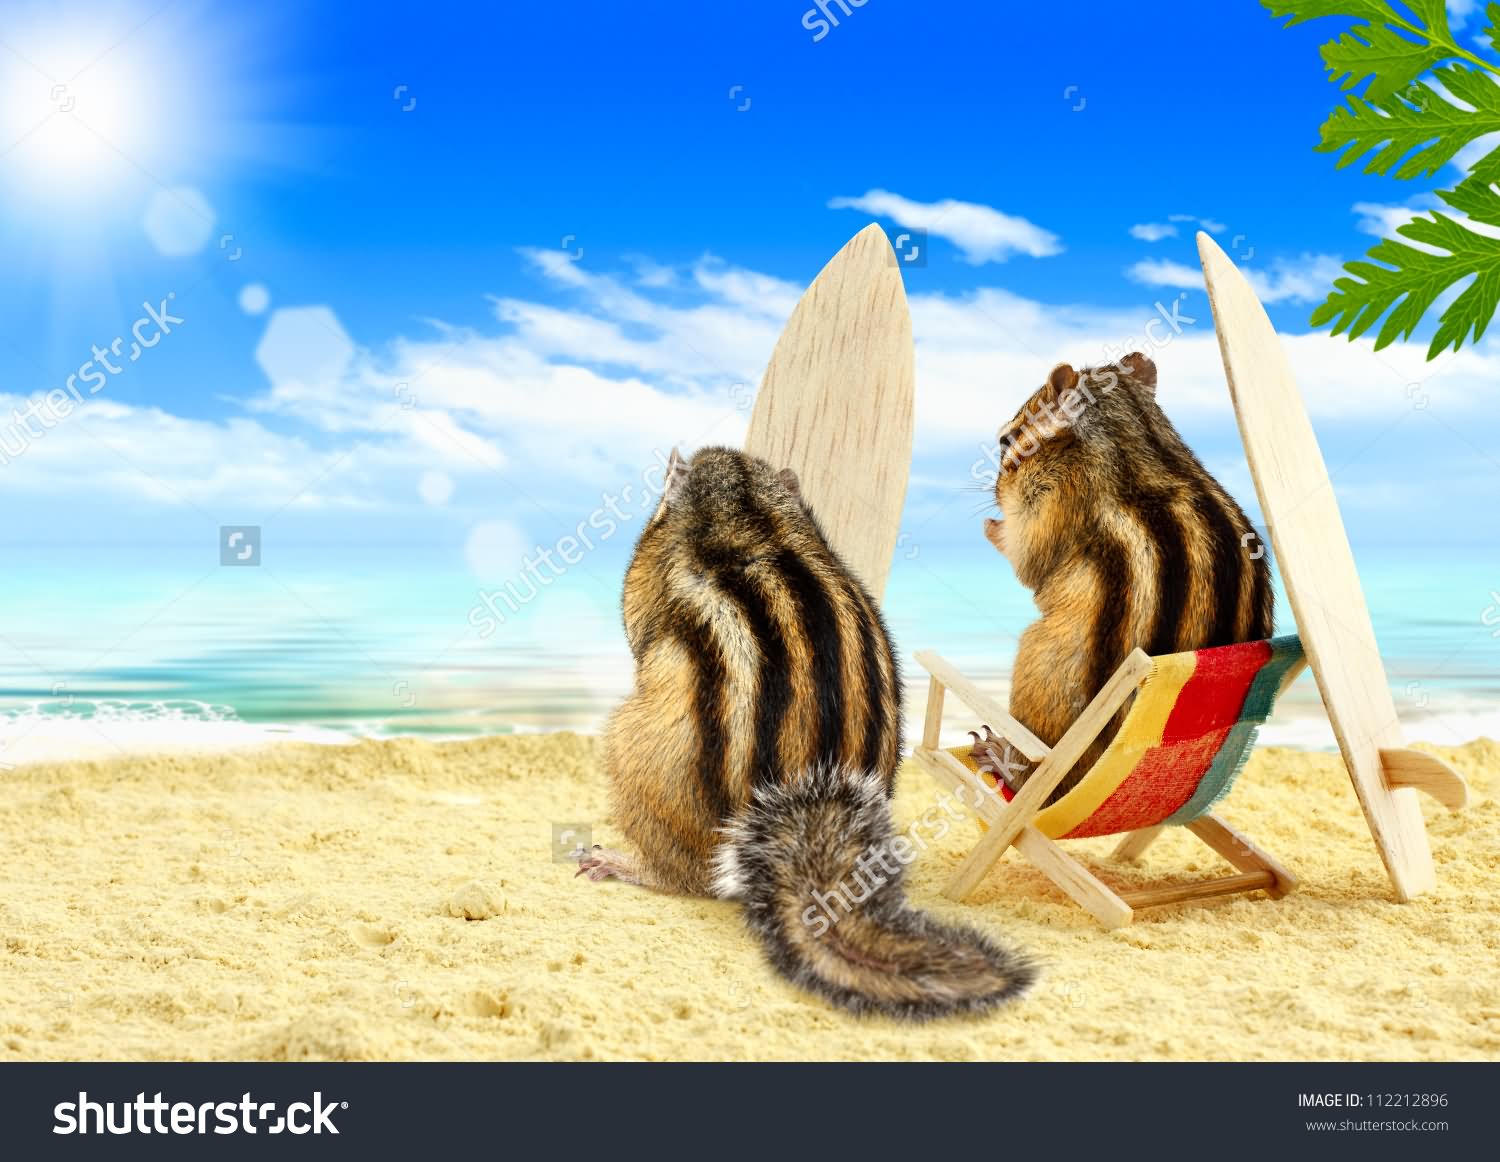 Chipmunks On Beach Funny Picture